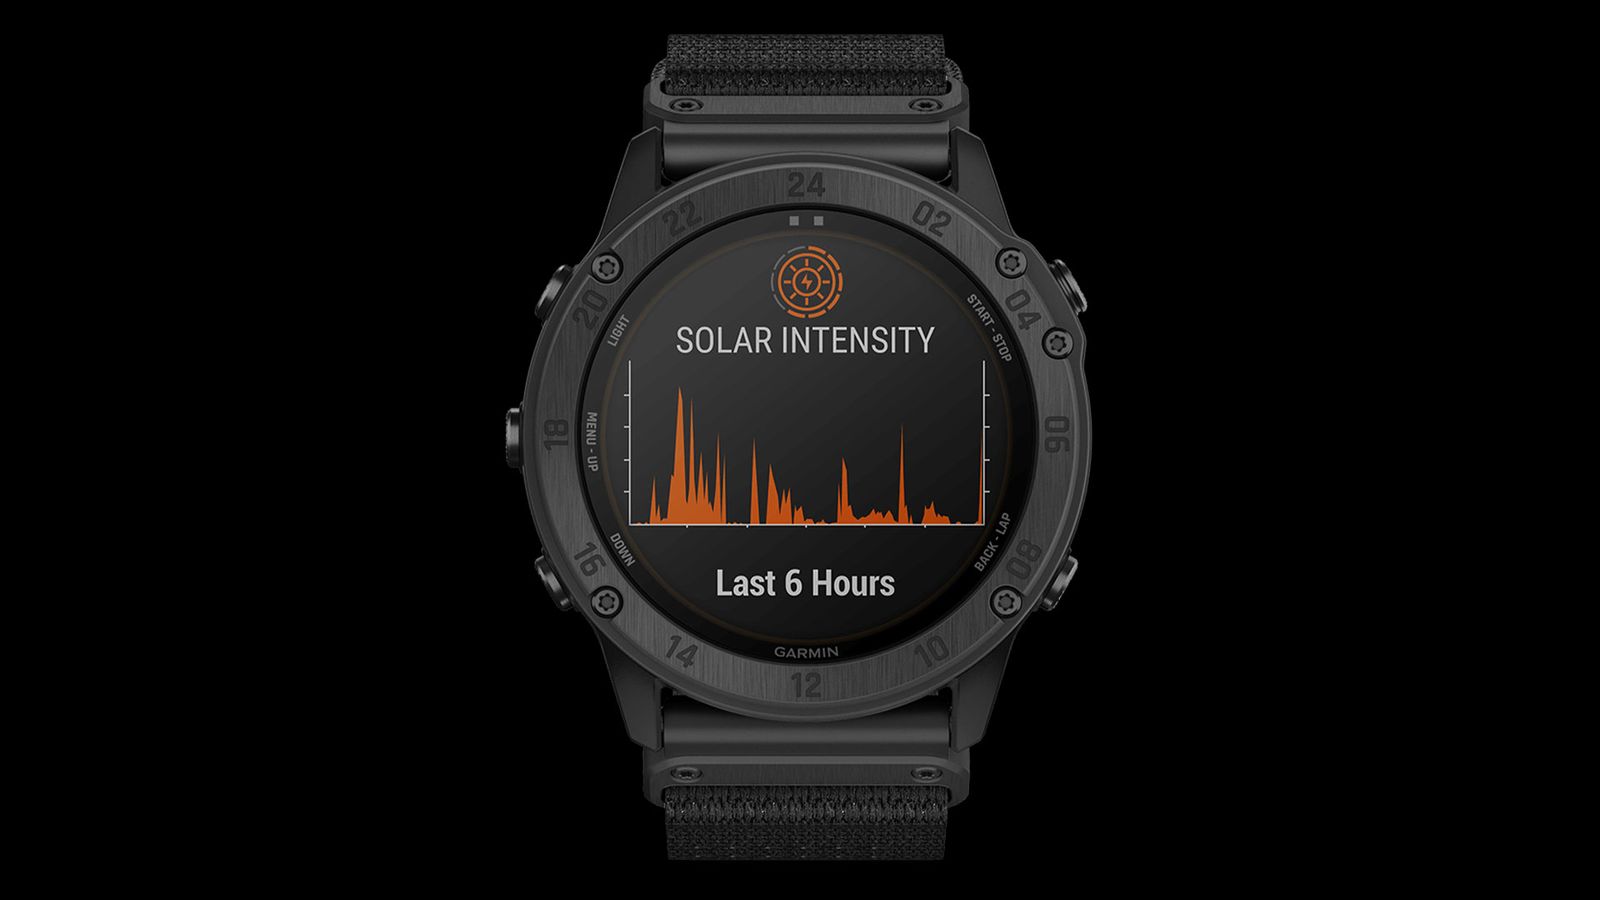 Garmin tactix Delta Solar product image of a black smartwatch with solar intensity information in orange on the display.